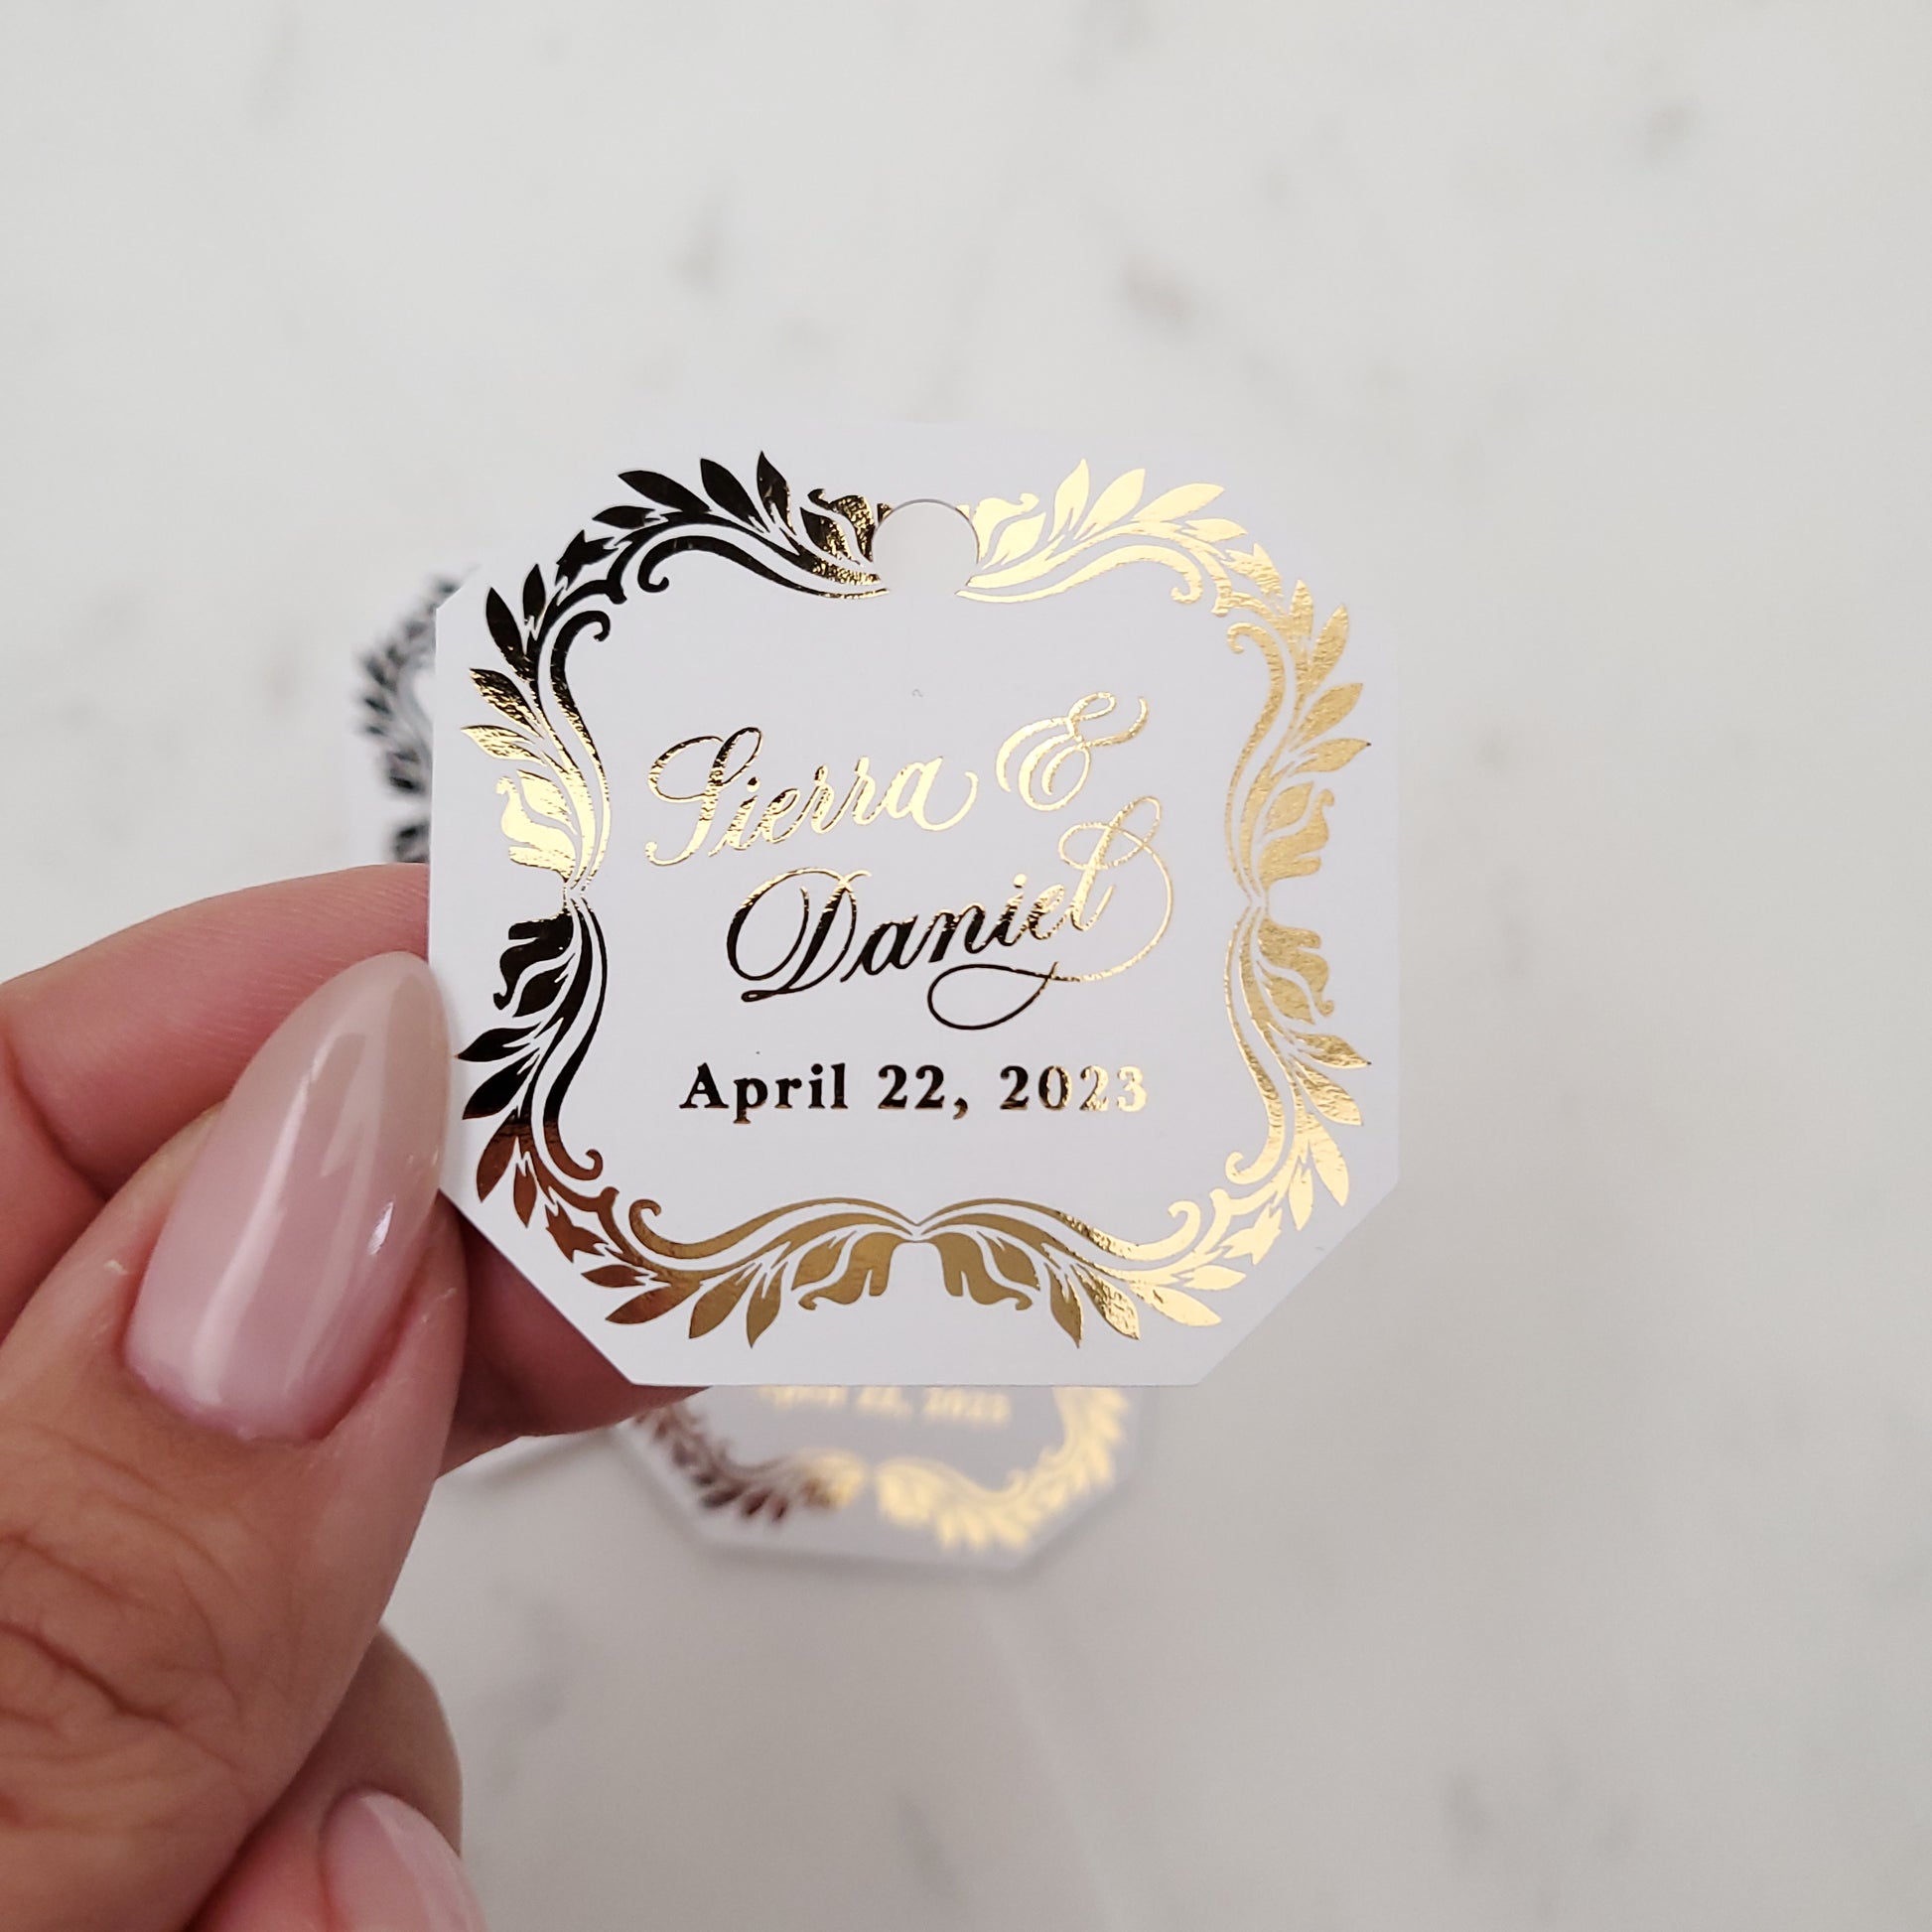 octagon shaped wedding favor tags with gold foiled text - XOXOKristen